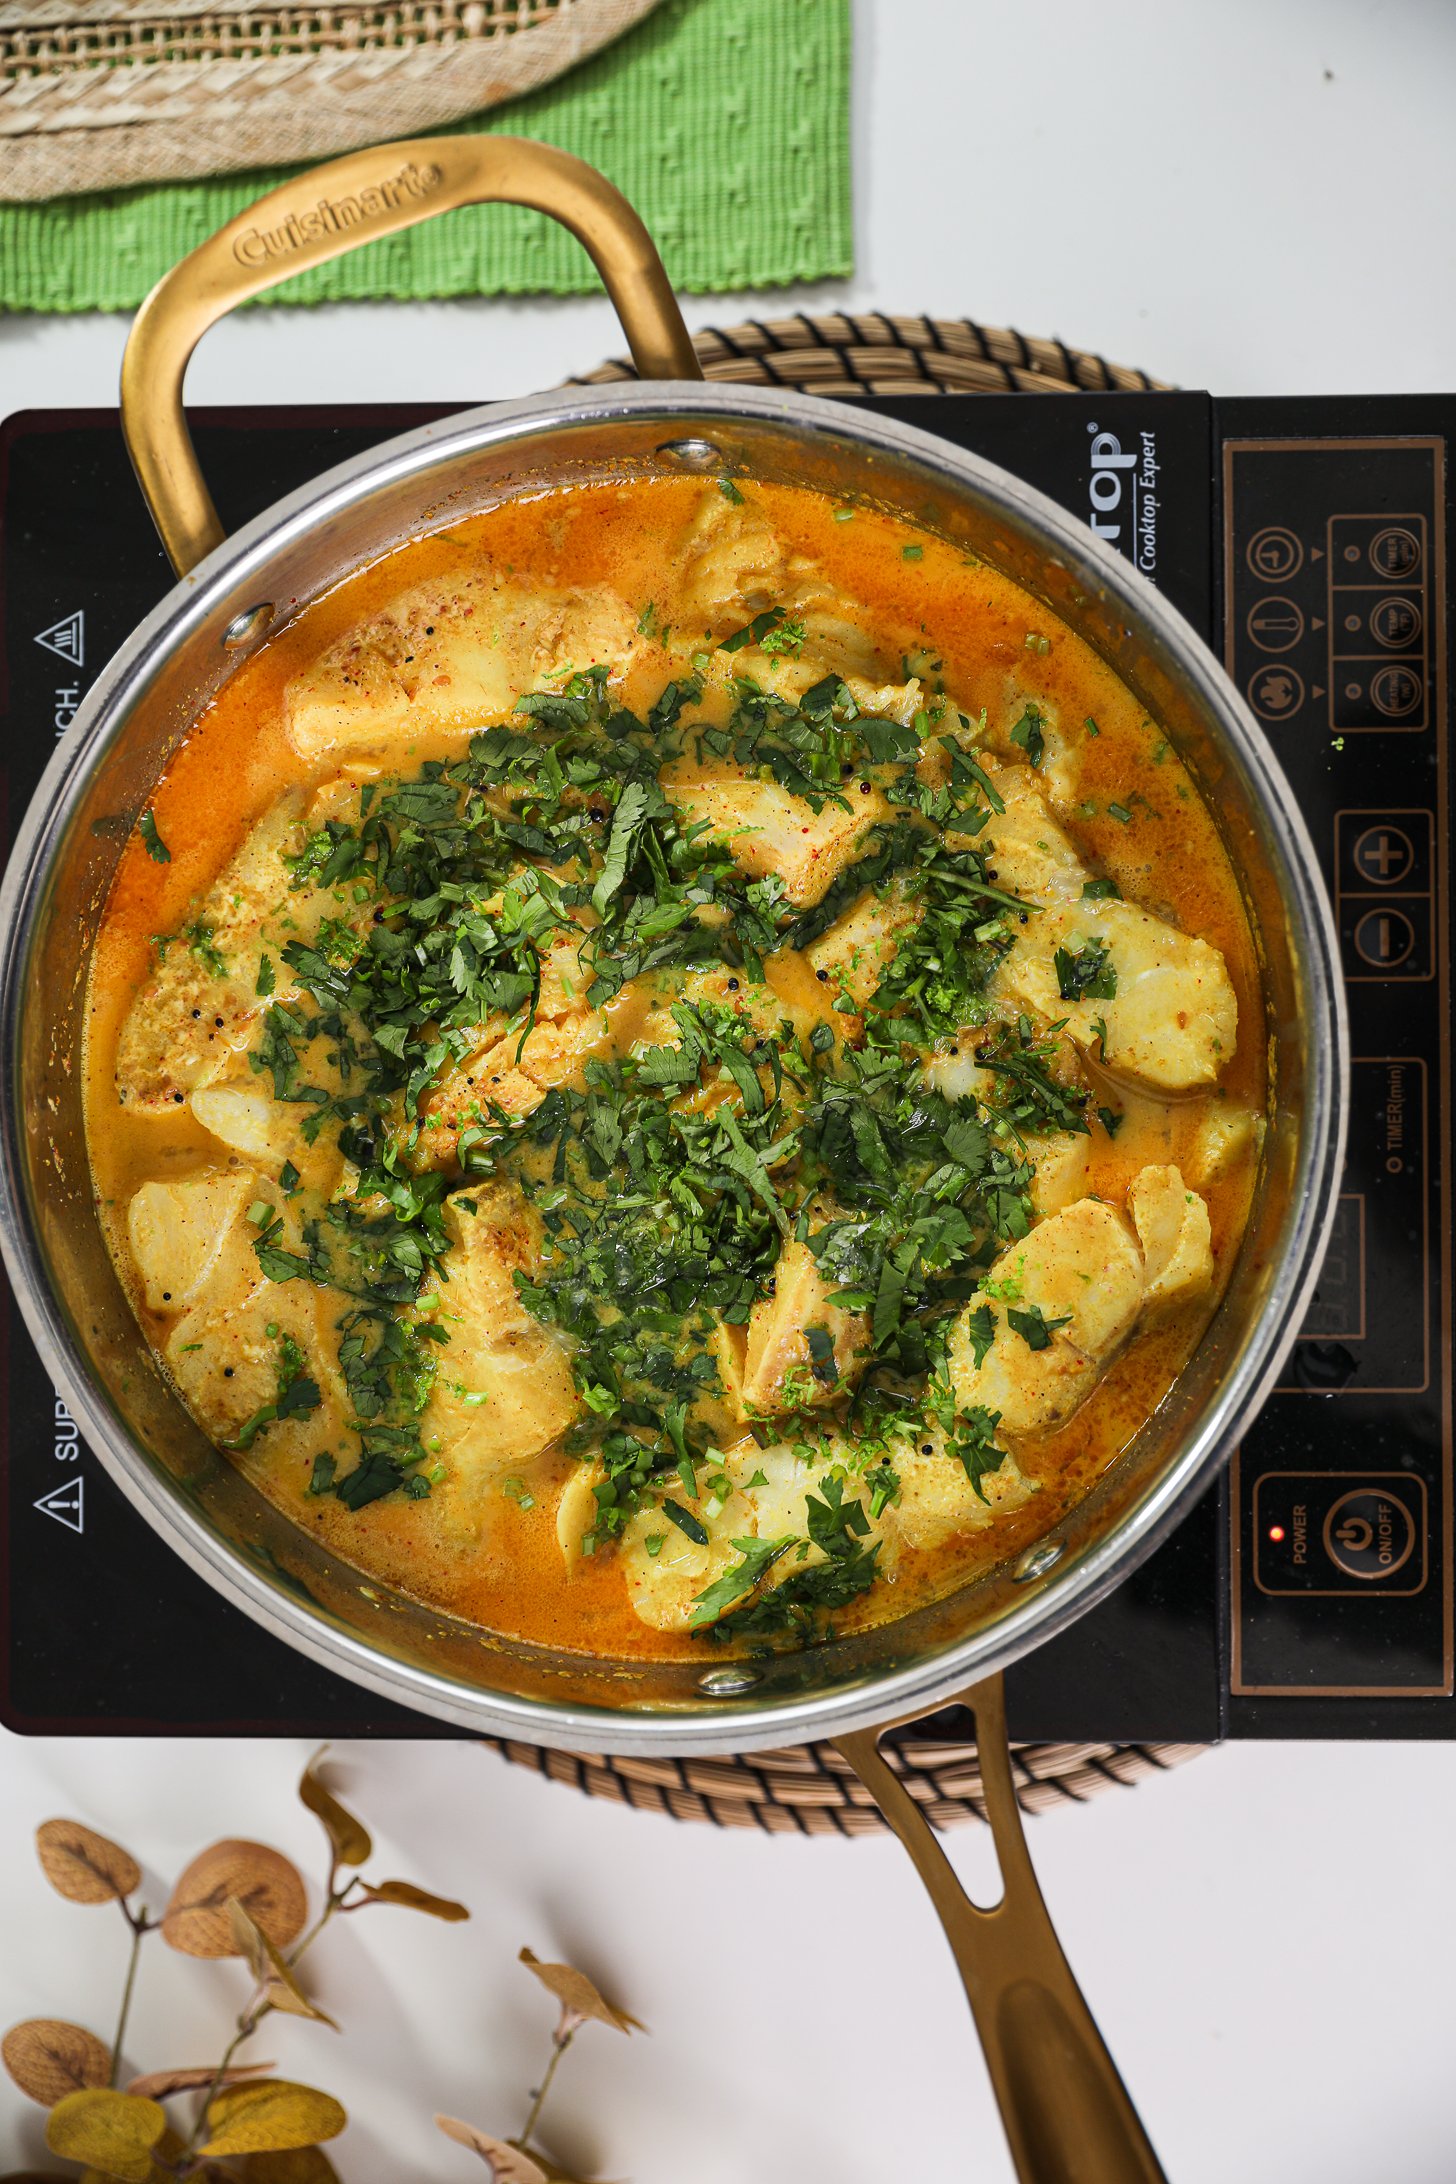 Pan of fish fillets in a curry sauce topped with cilantro placed on a mobile cooktop.